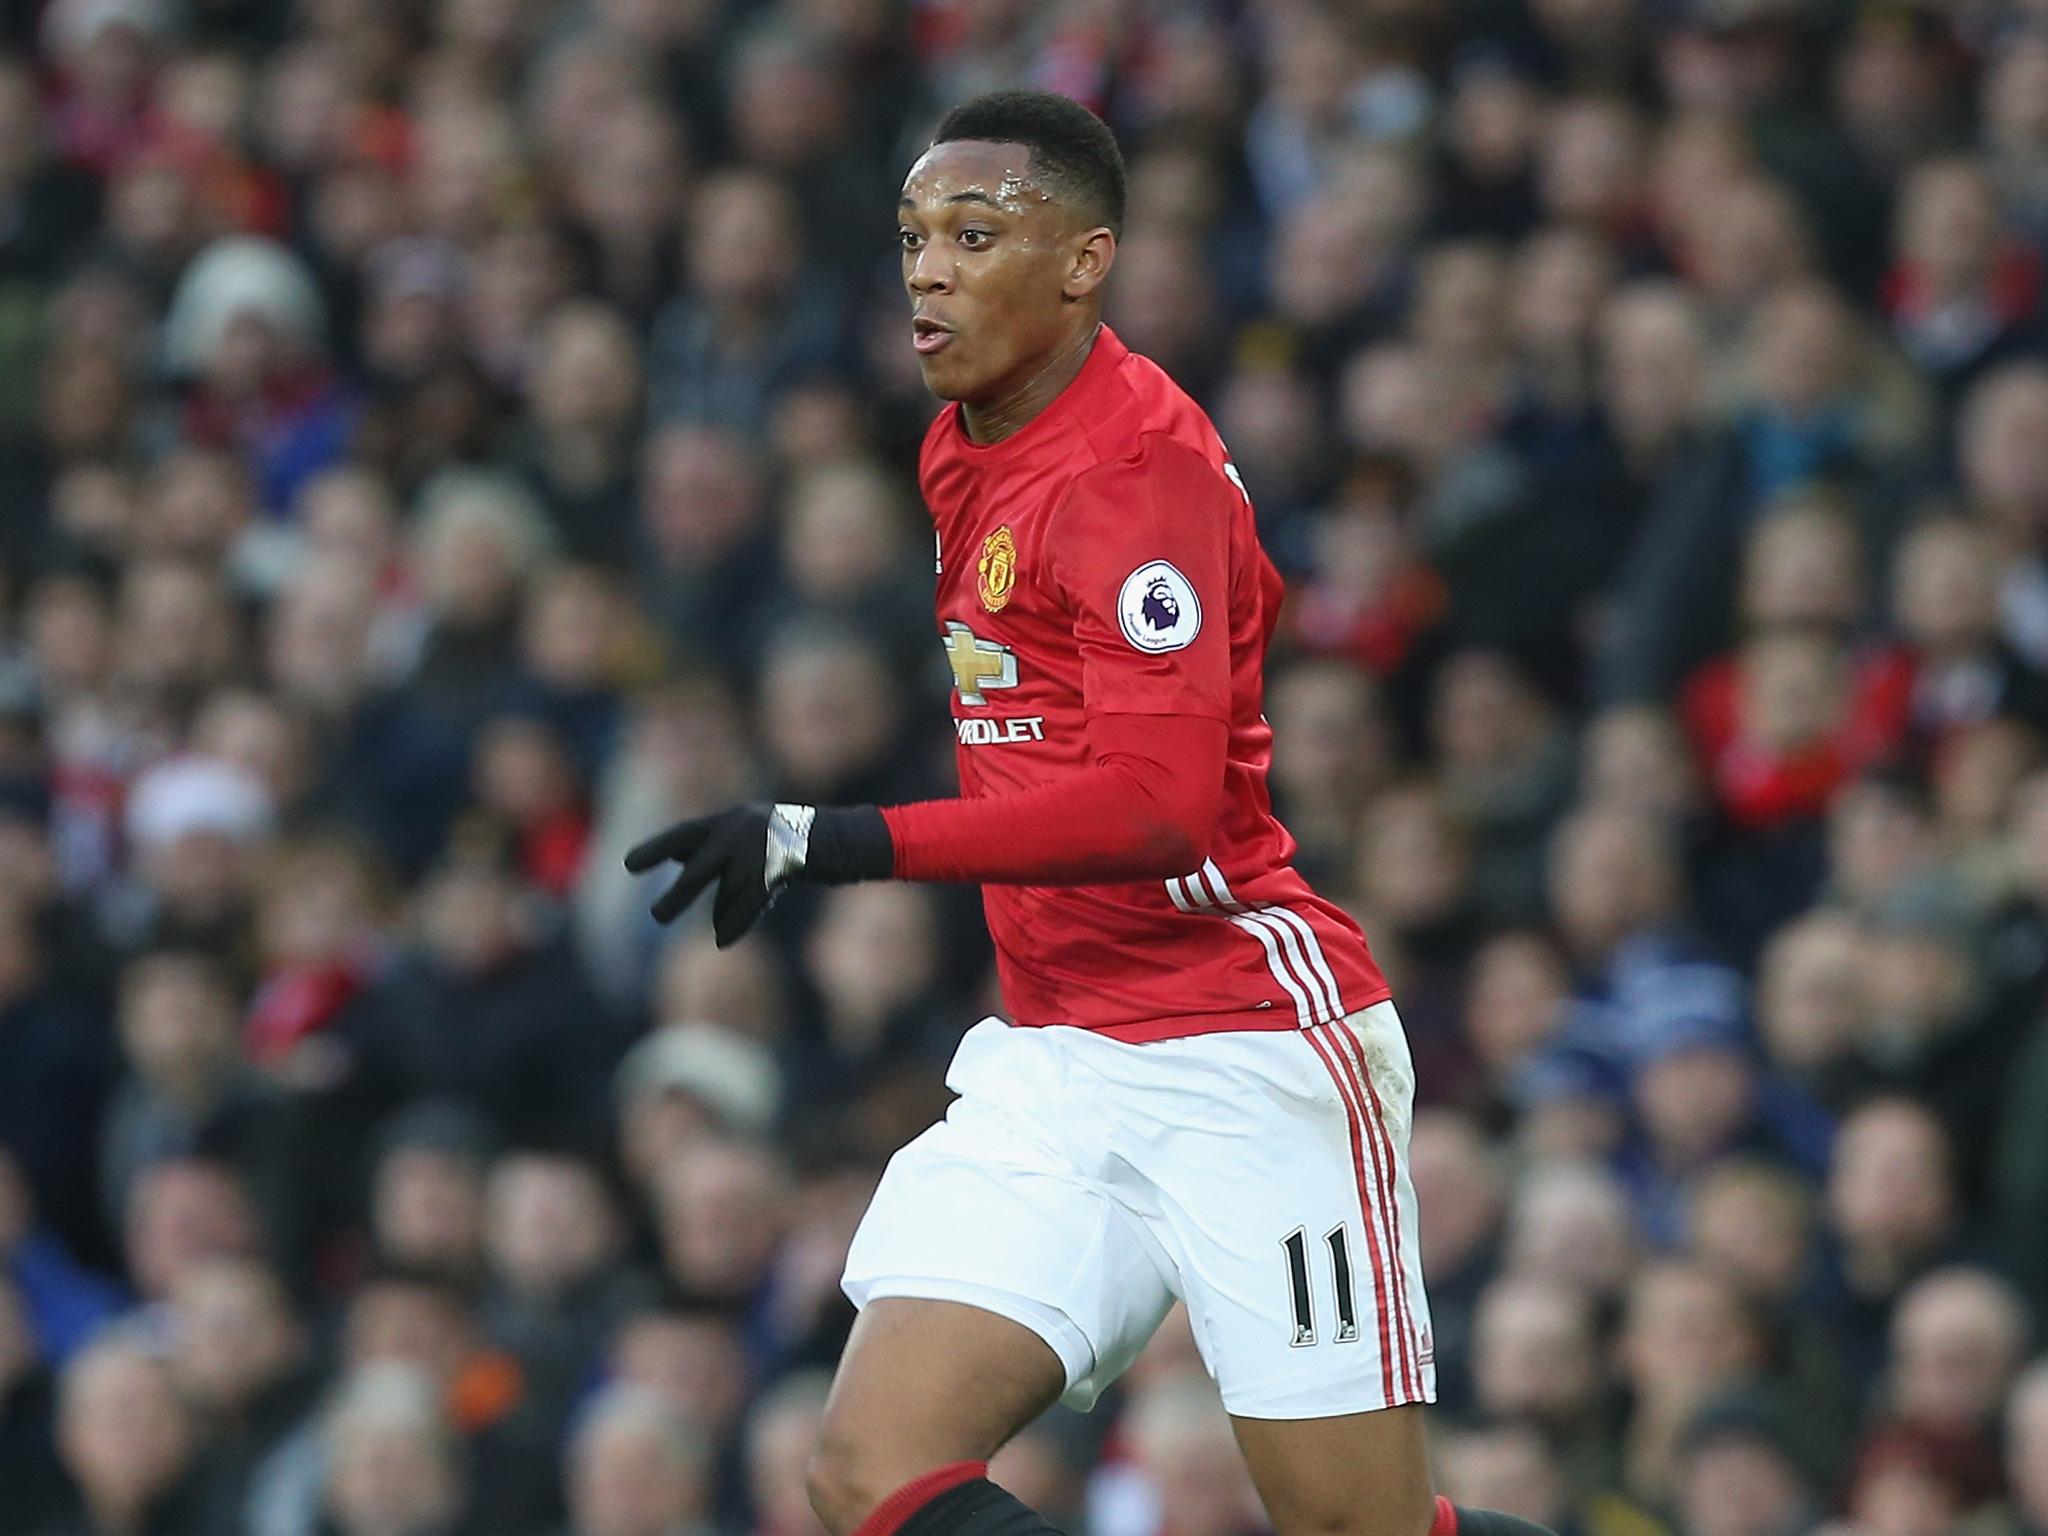 Martial has only managed one Premier League goal this season